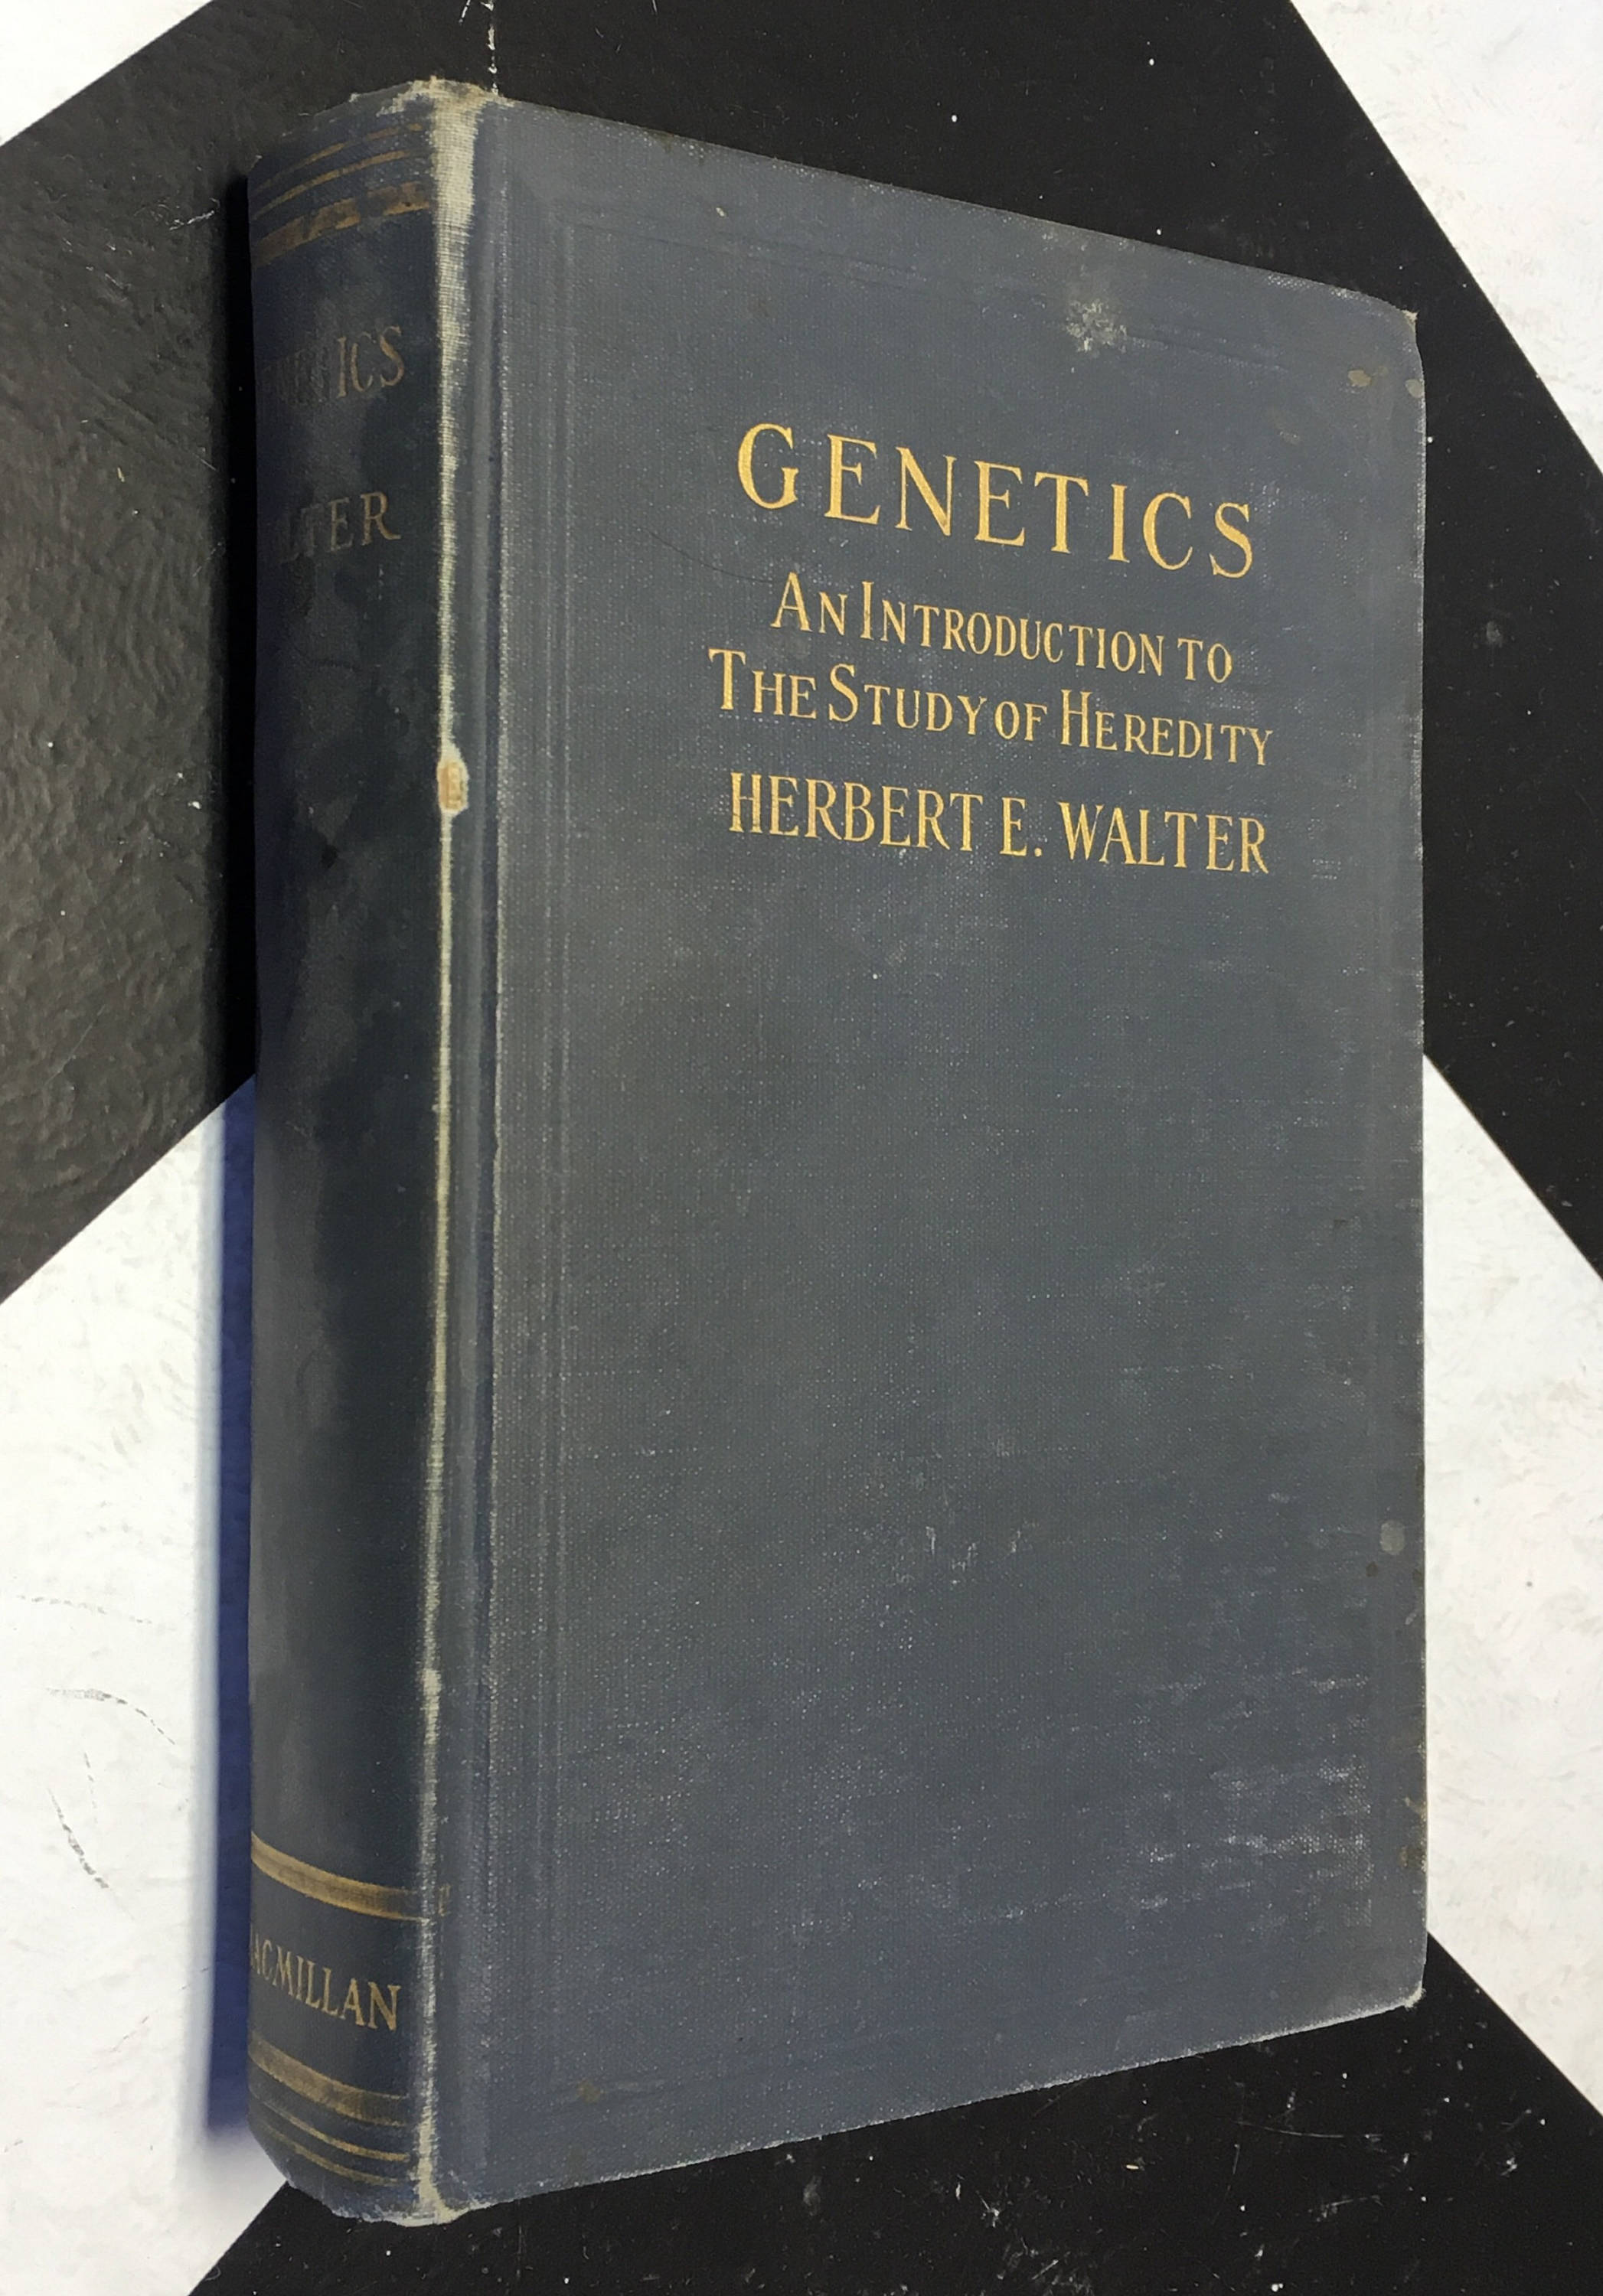 Genetics: An Introduction to the Study of Heredity by Herbert E. Walter ...